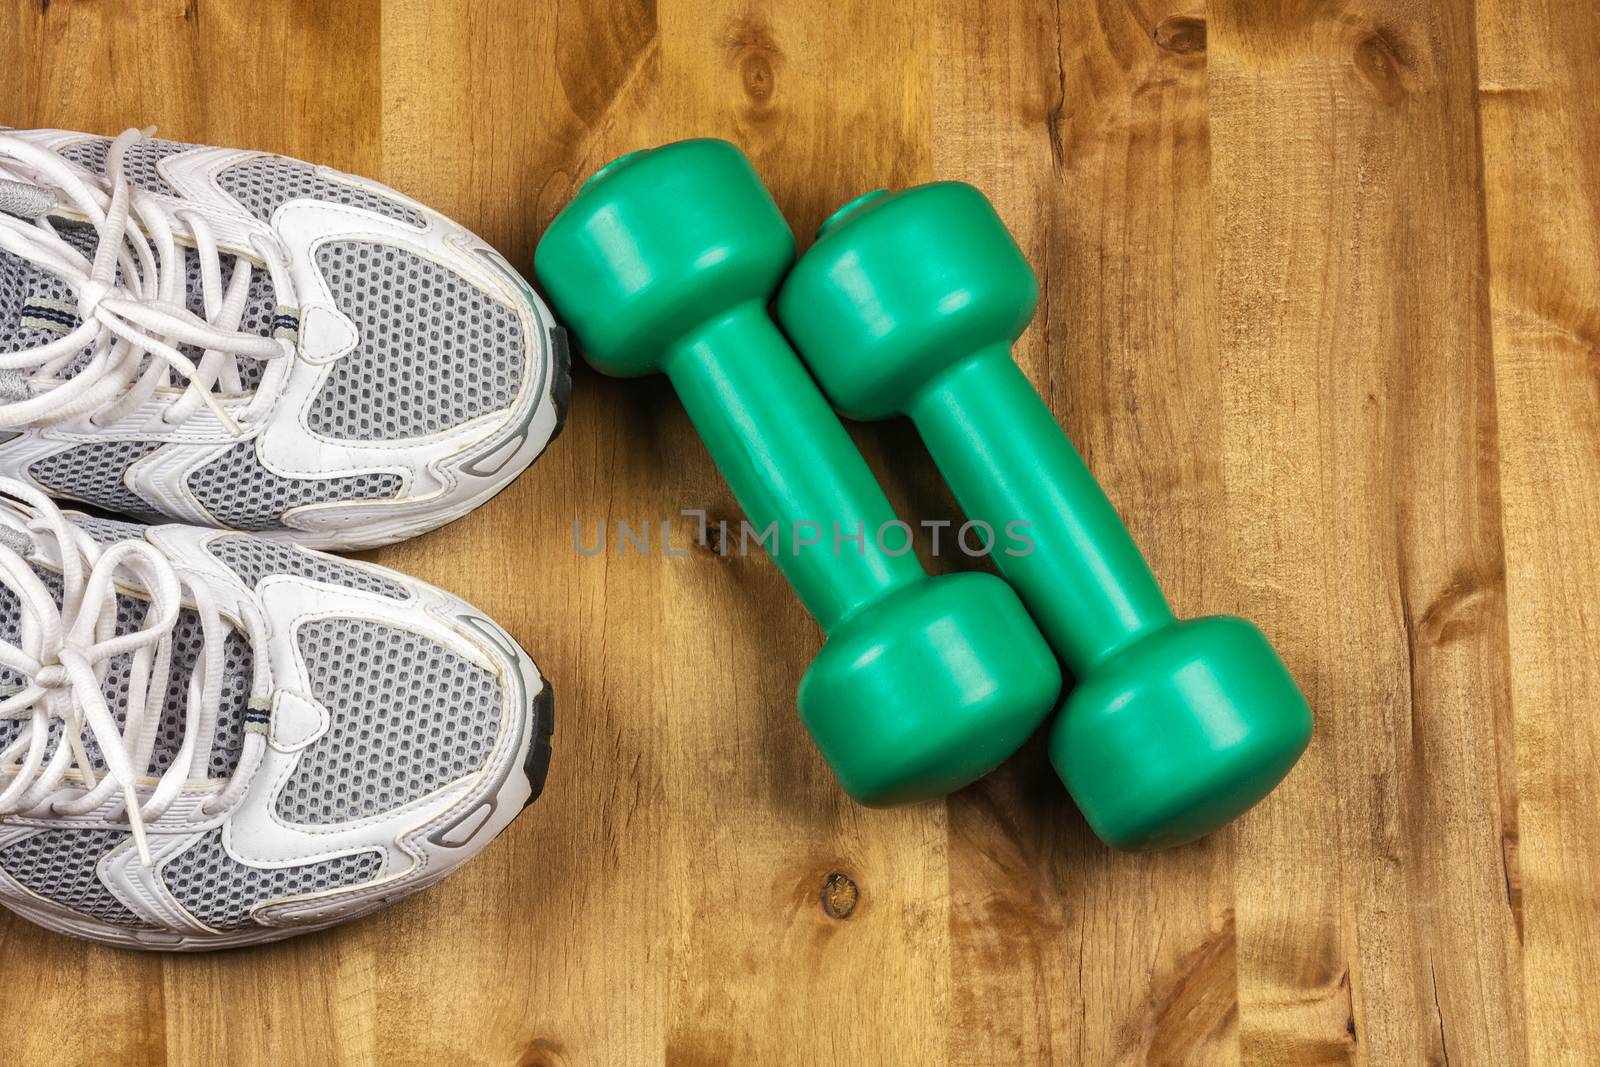 White sneakers and dumbbells on a wooden surface by Grommik